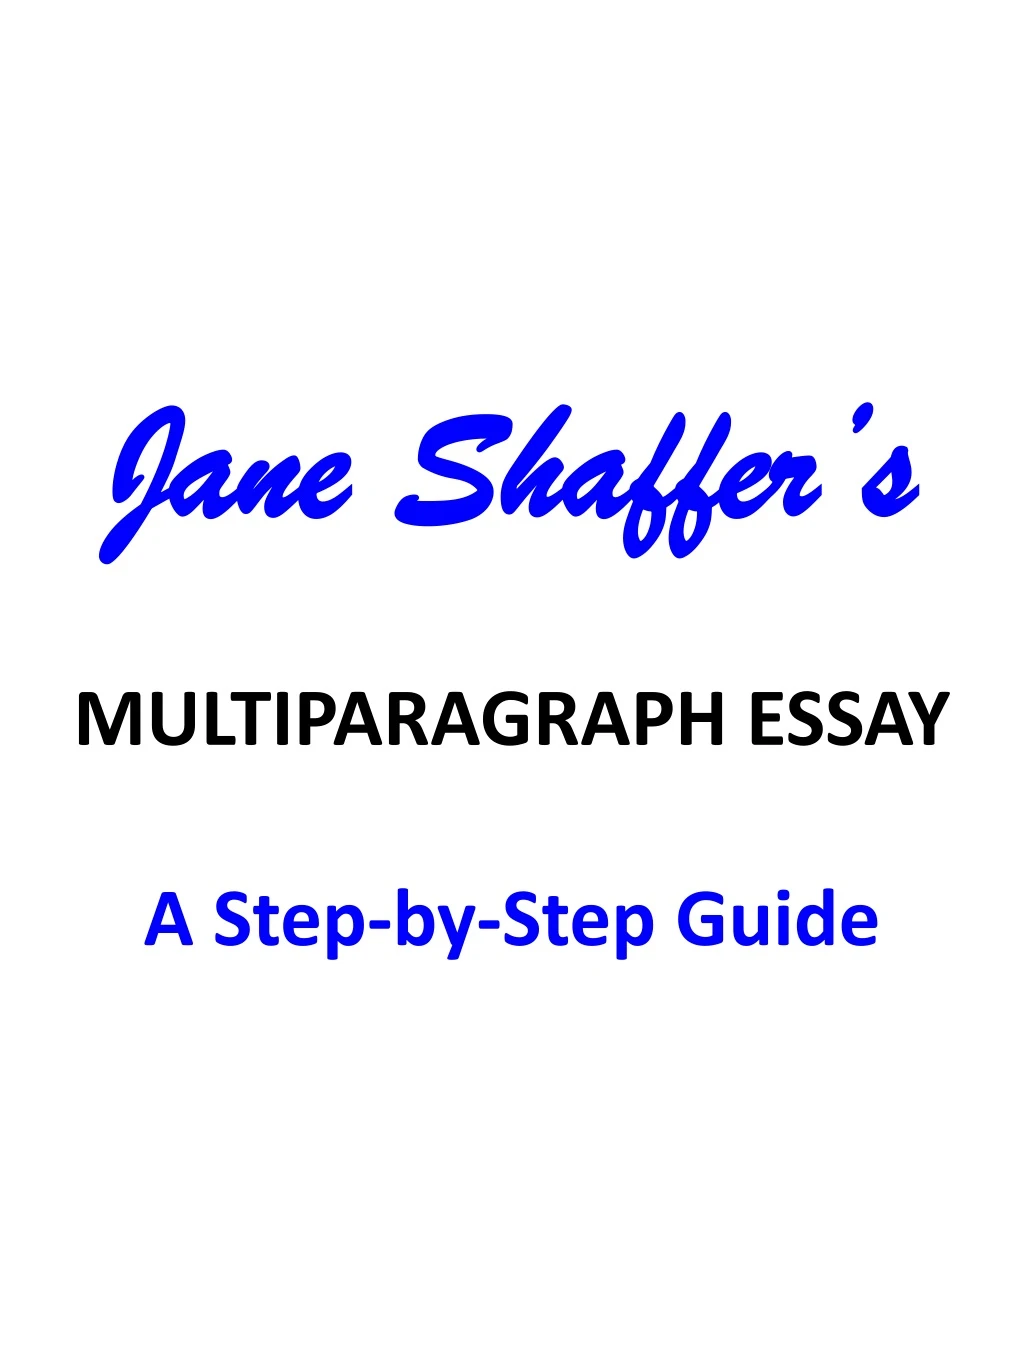 jane shaffer s multiparagraph essay a step by step guide